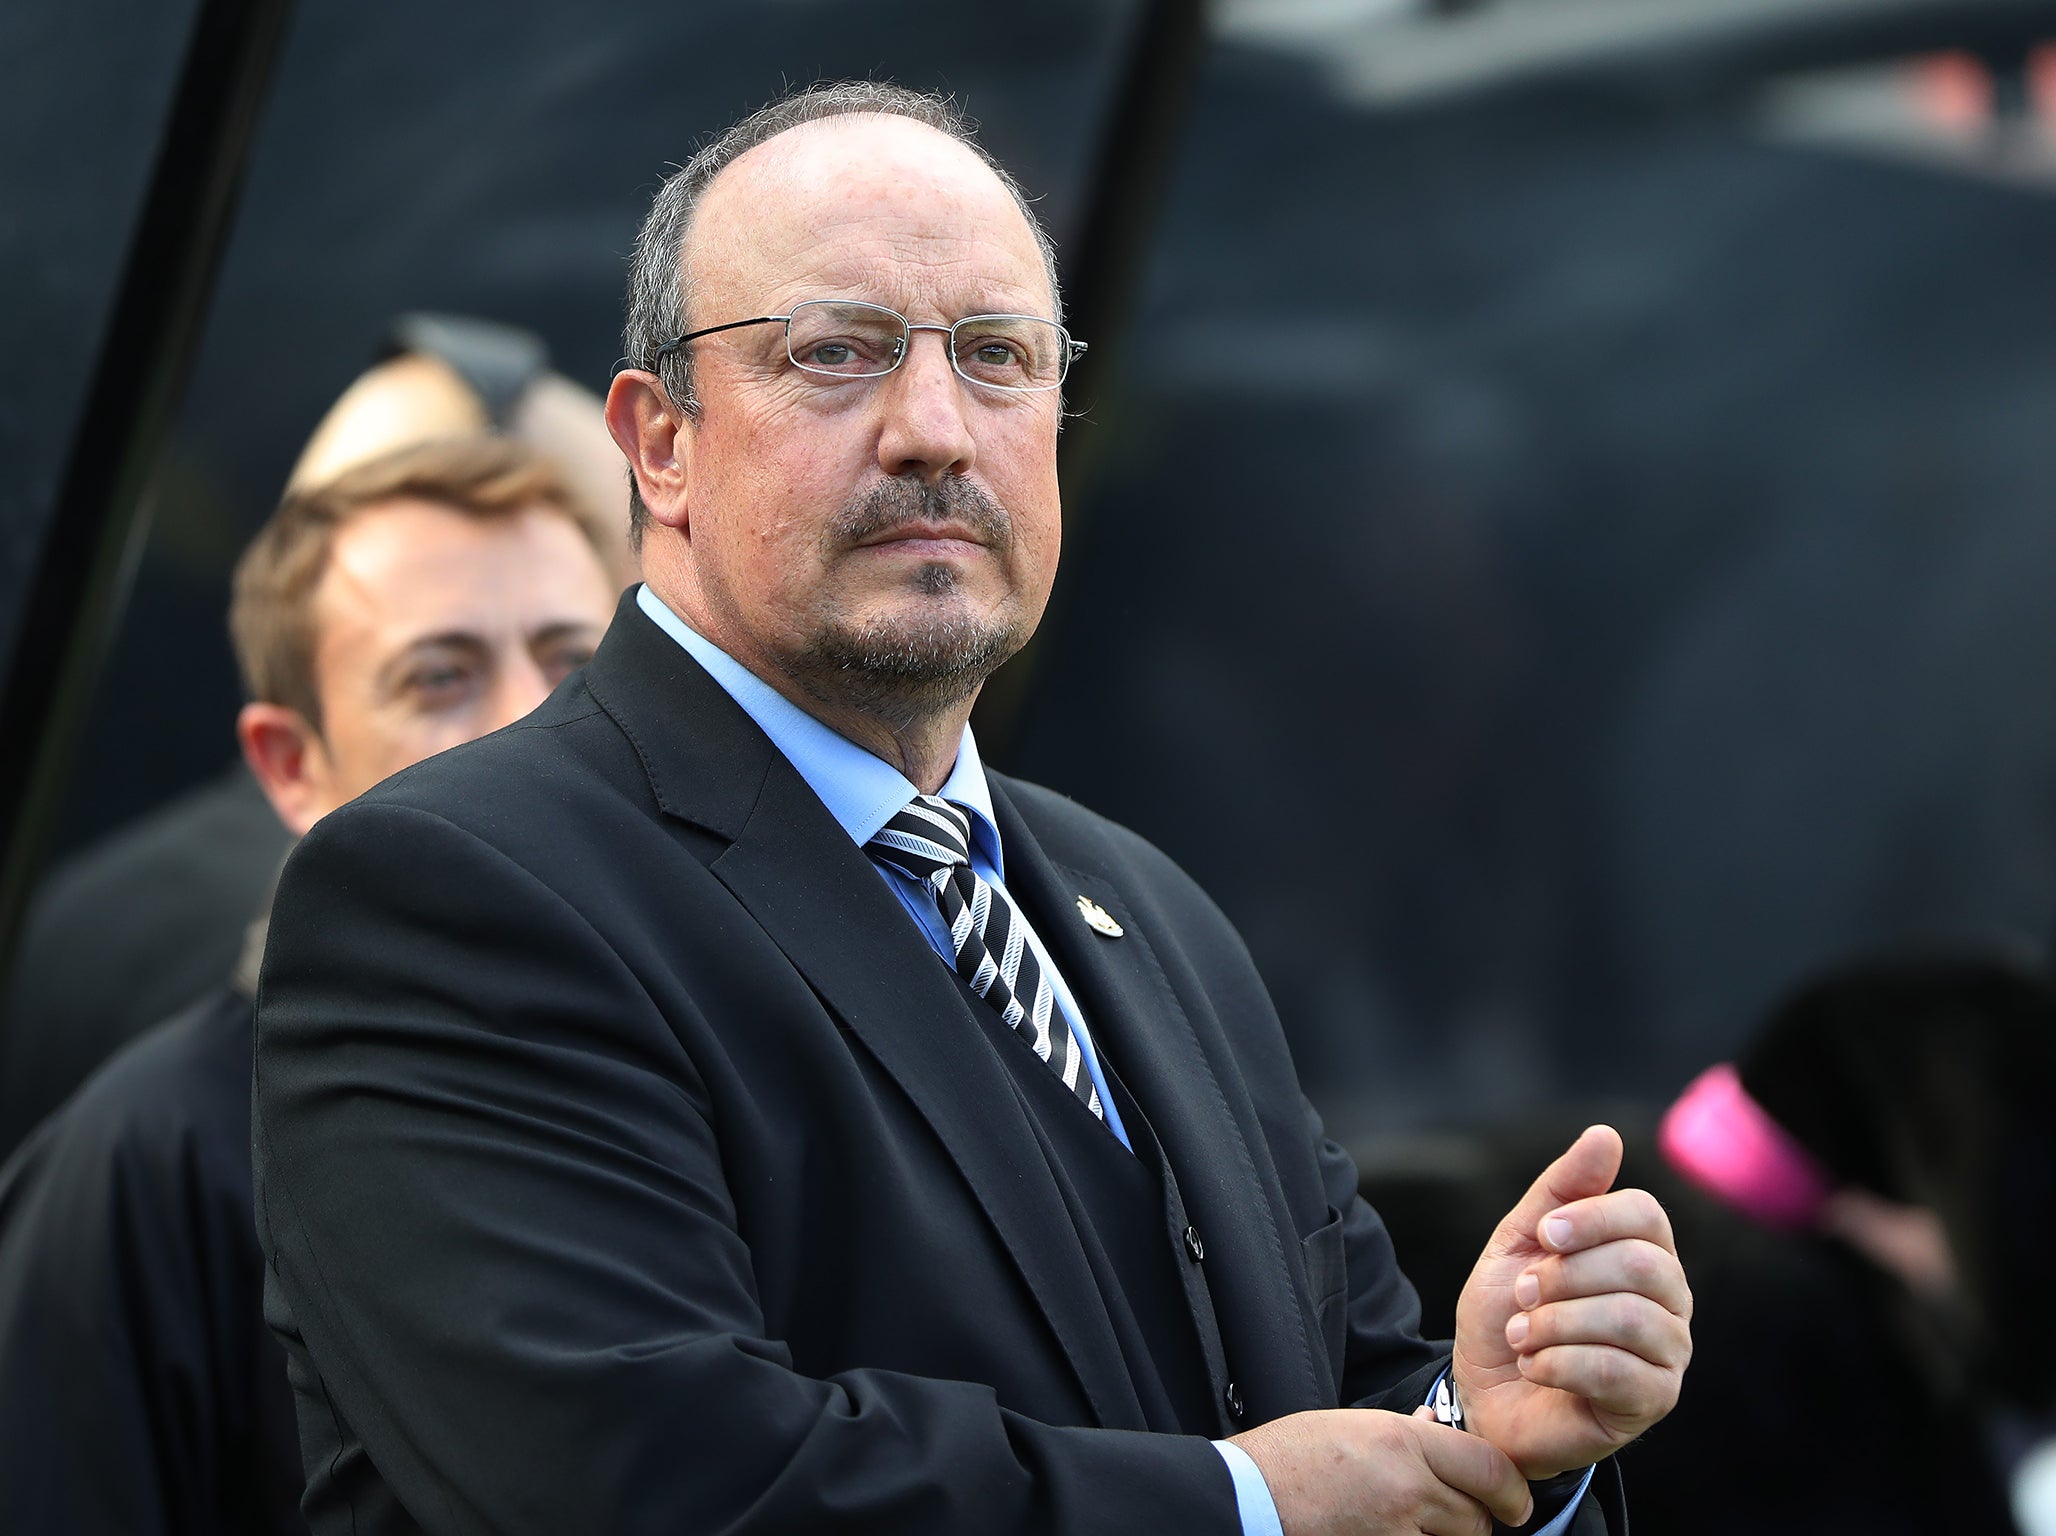 Benitez was absent from the game